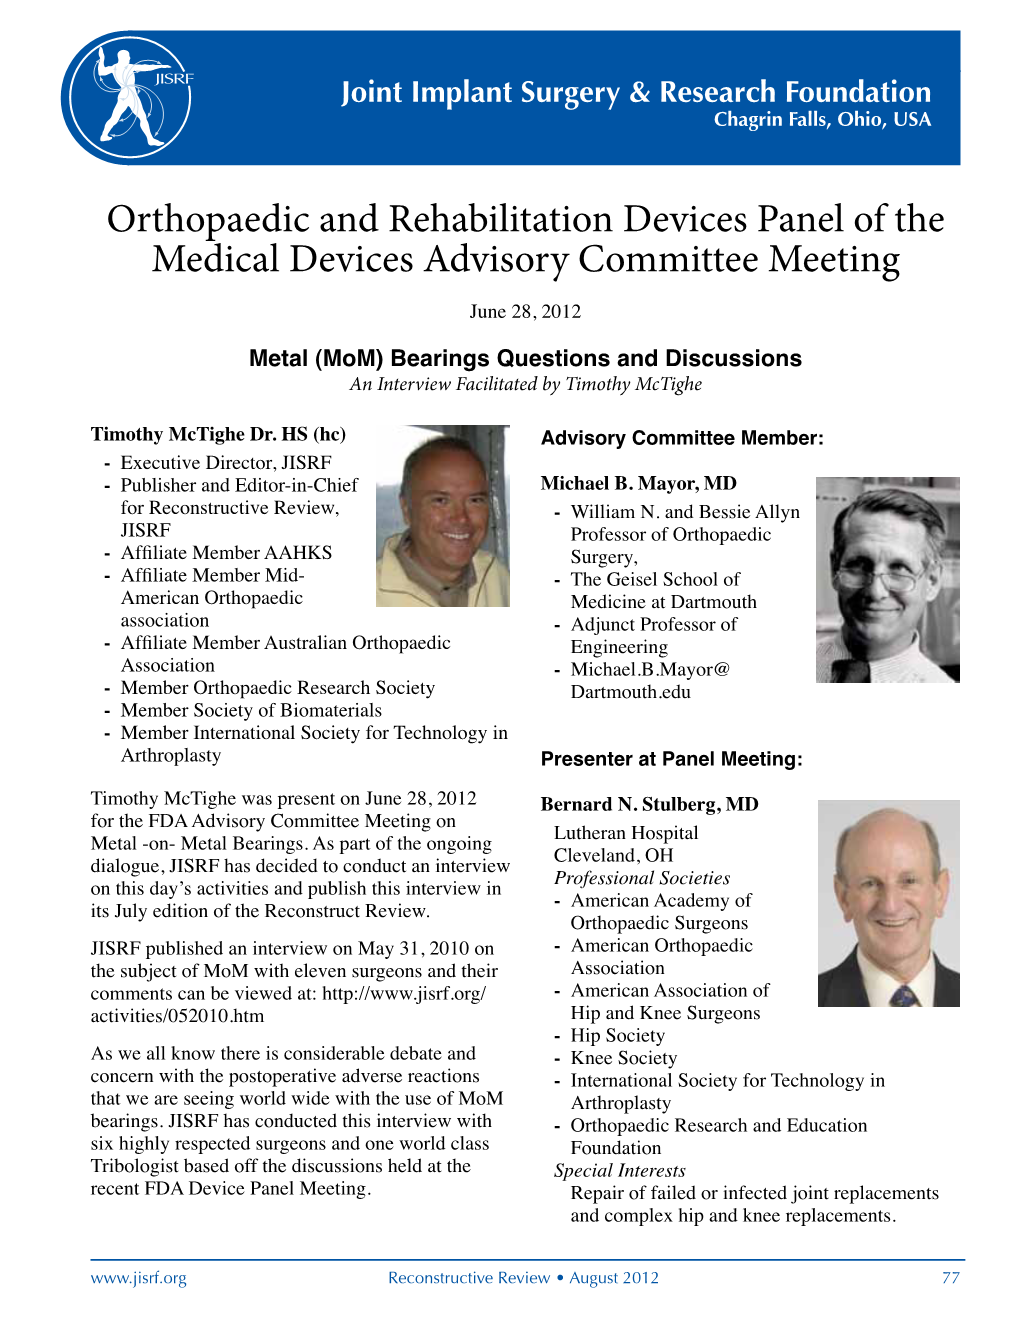 Orthopaedic and Rehabilitation Devices Panel of the Medical Devices Advisory Committee Meeting